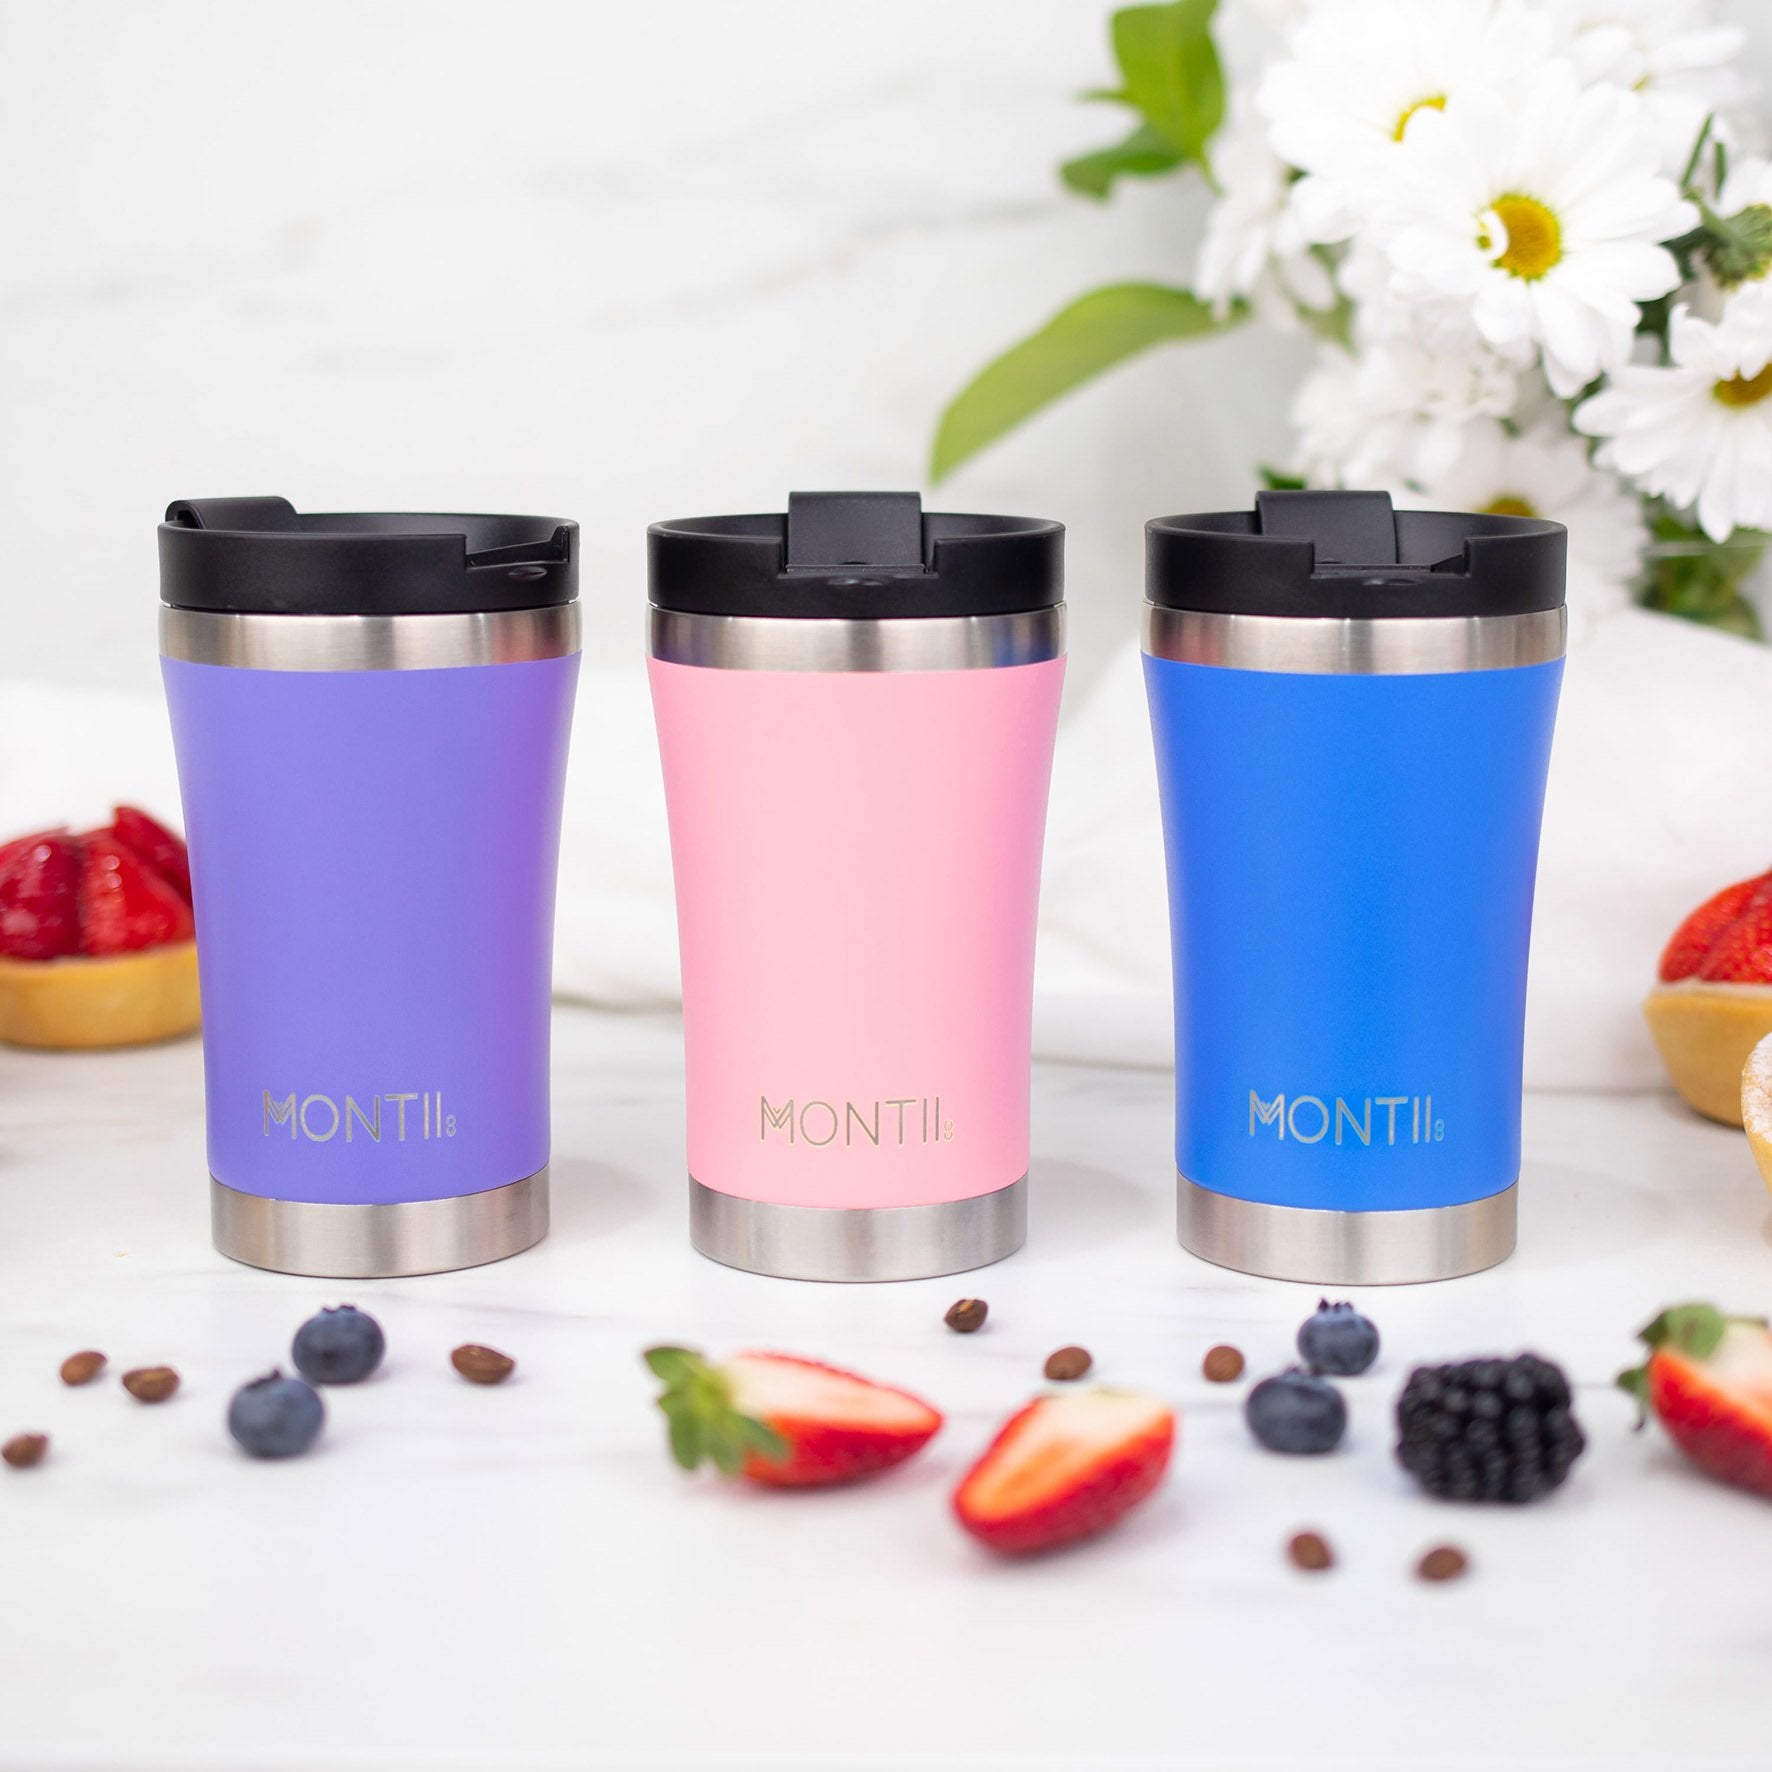 Montii Co Regular Coffee Cup Strawberry | 25% OFF | Children of the Wild